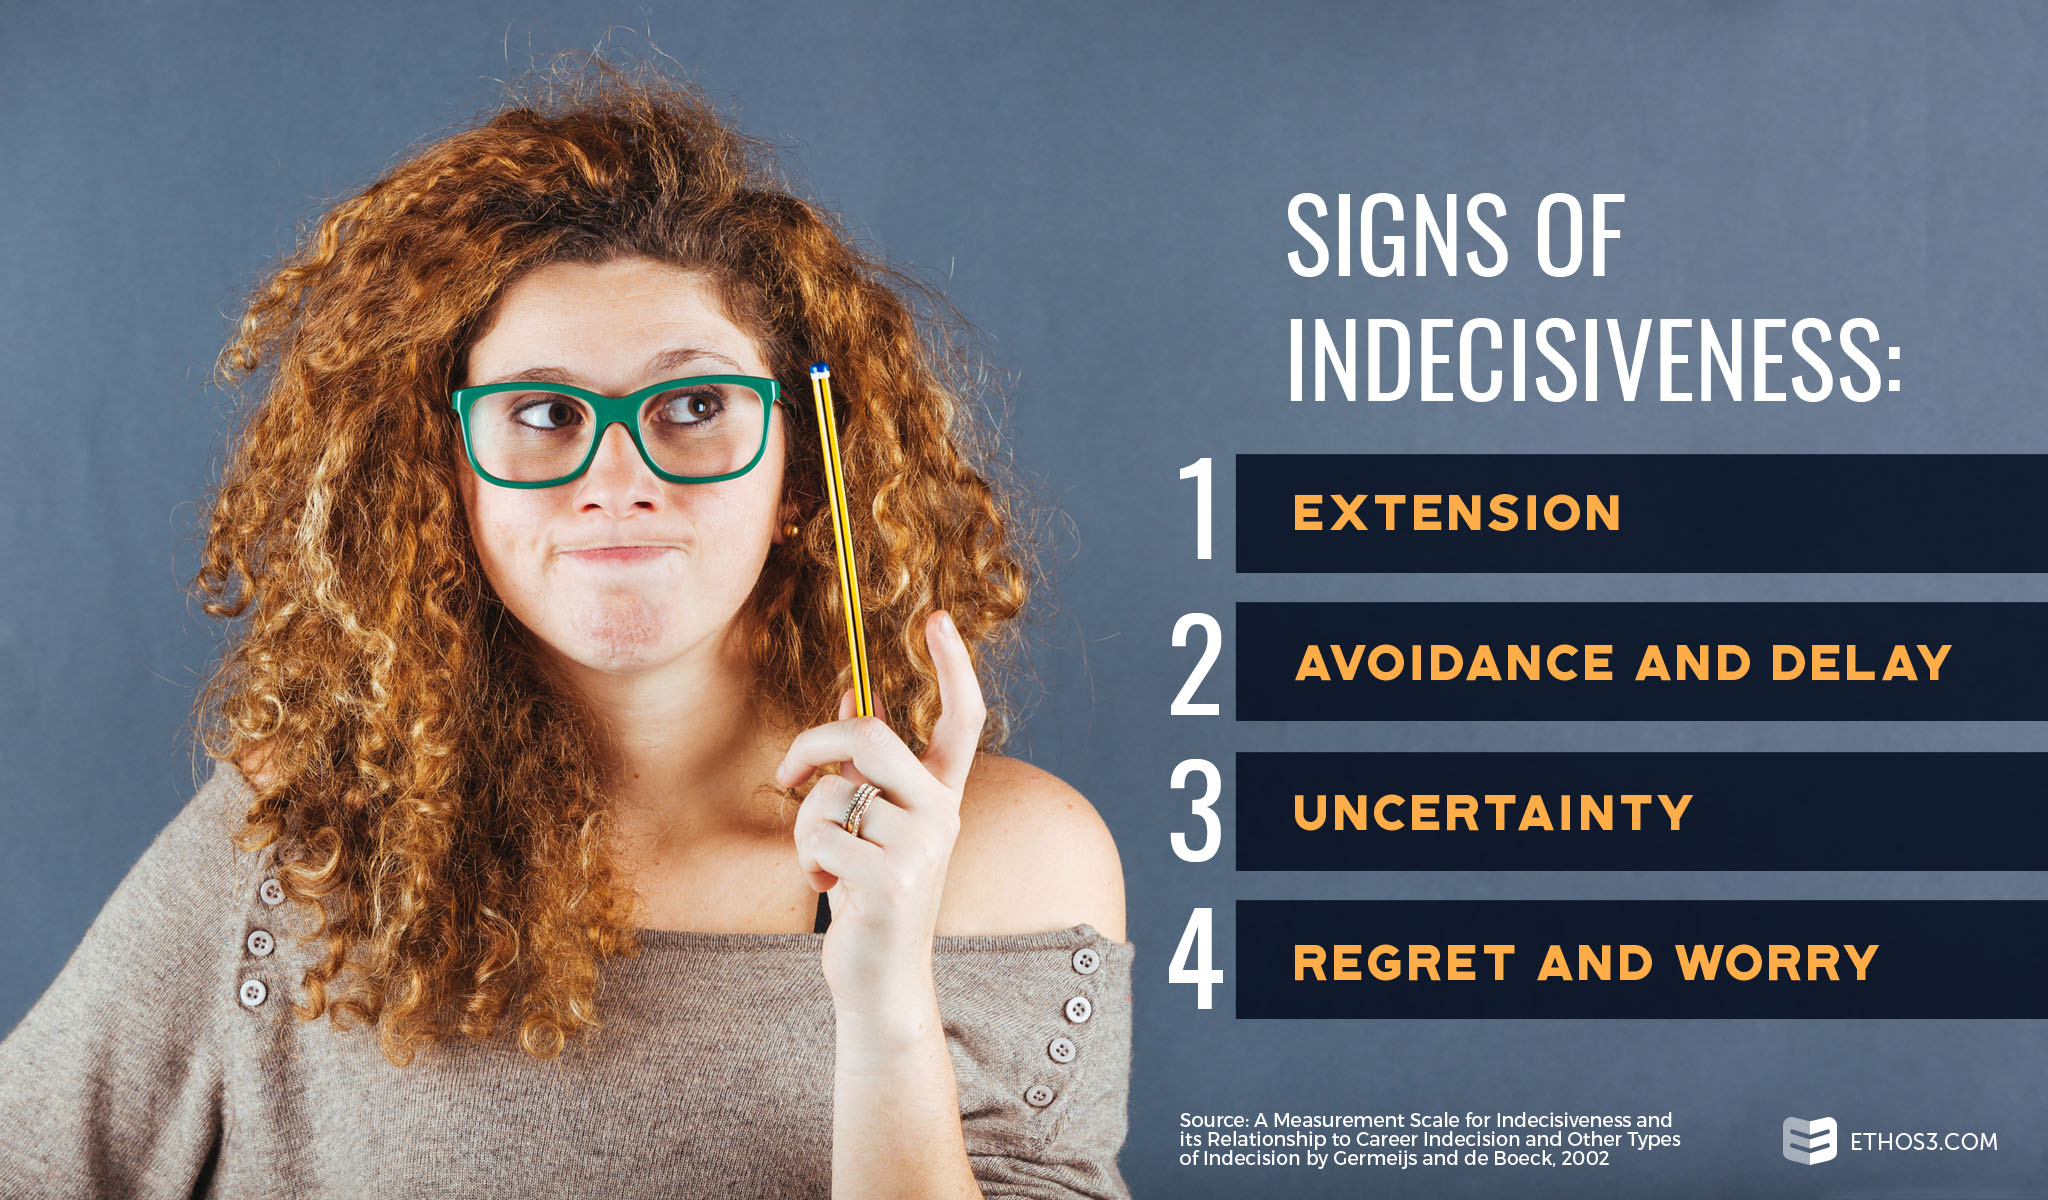 Signs of Indecisiveness